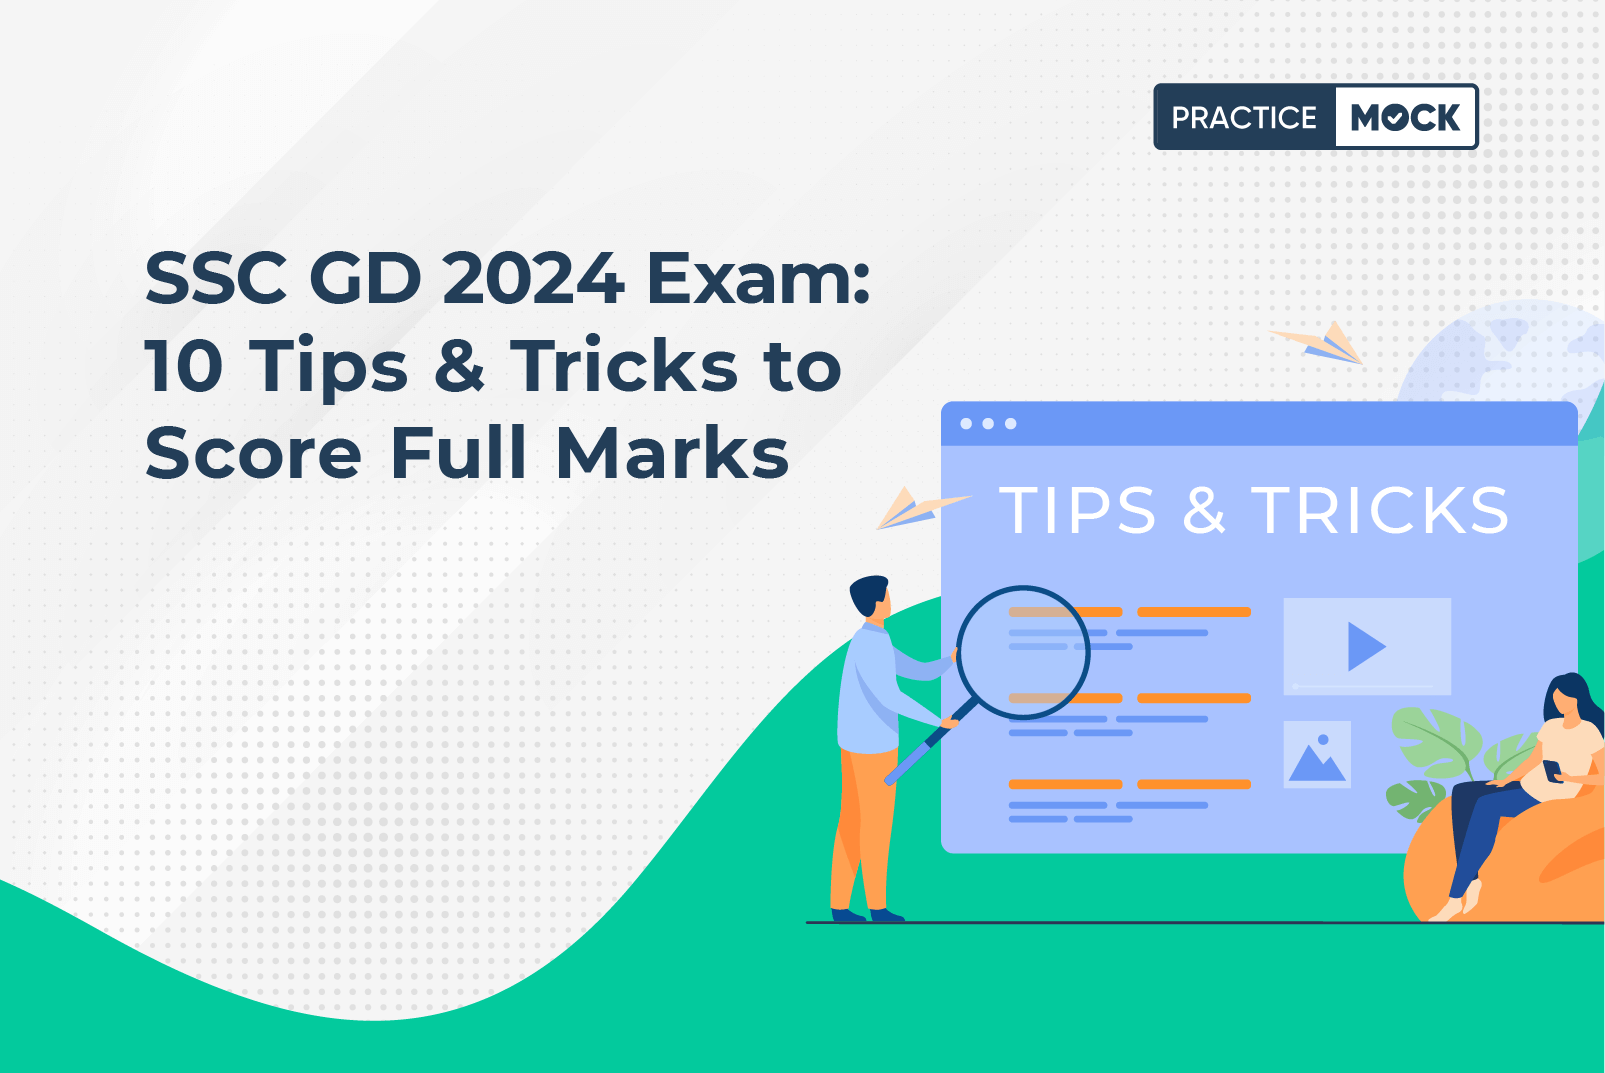 SSC GD 2024 Exam: 10 Tips and Tricks to Score Full Marks